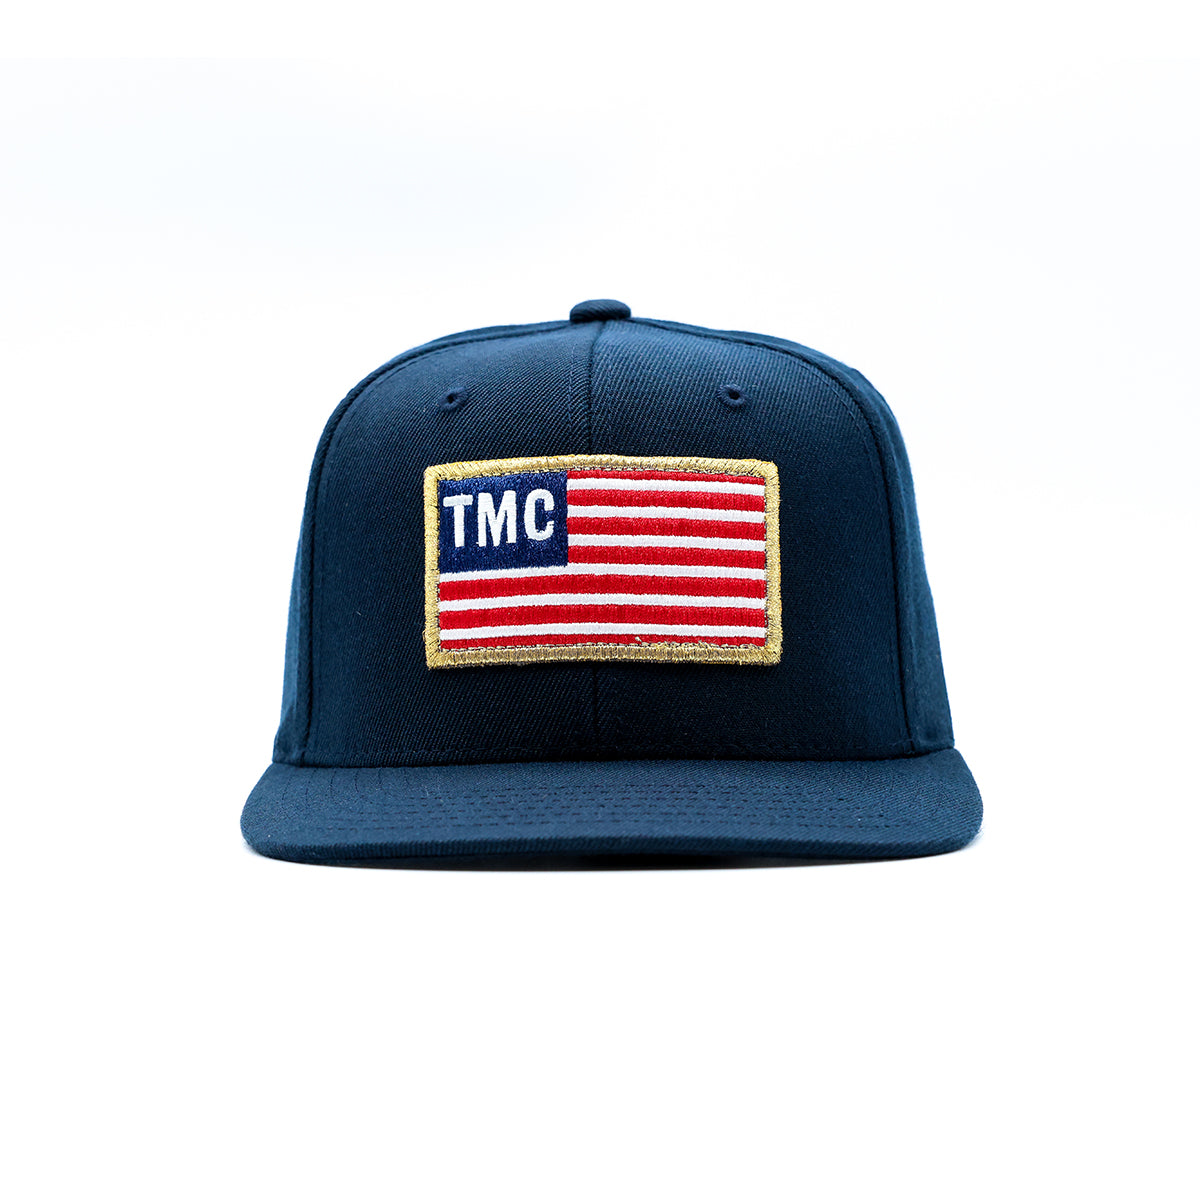 TMC Flag Patch Limited Edition Snapback - Navy/Red/White - Front